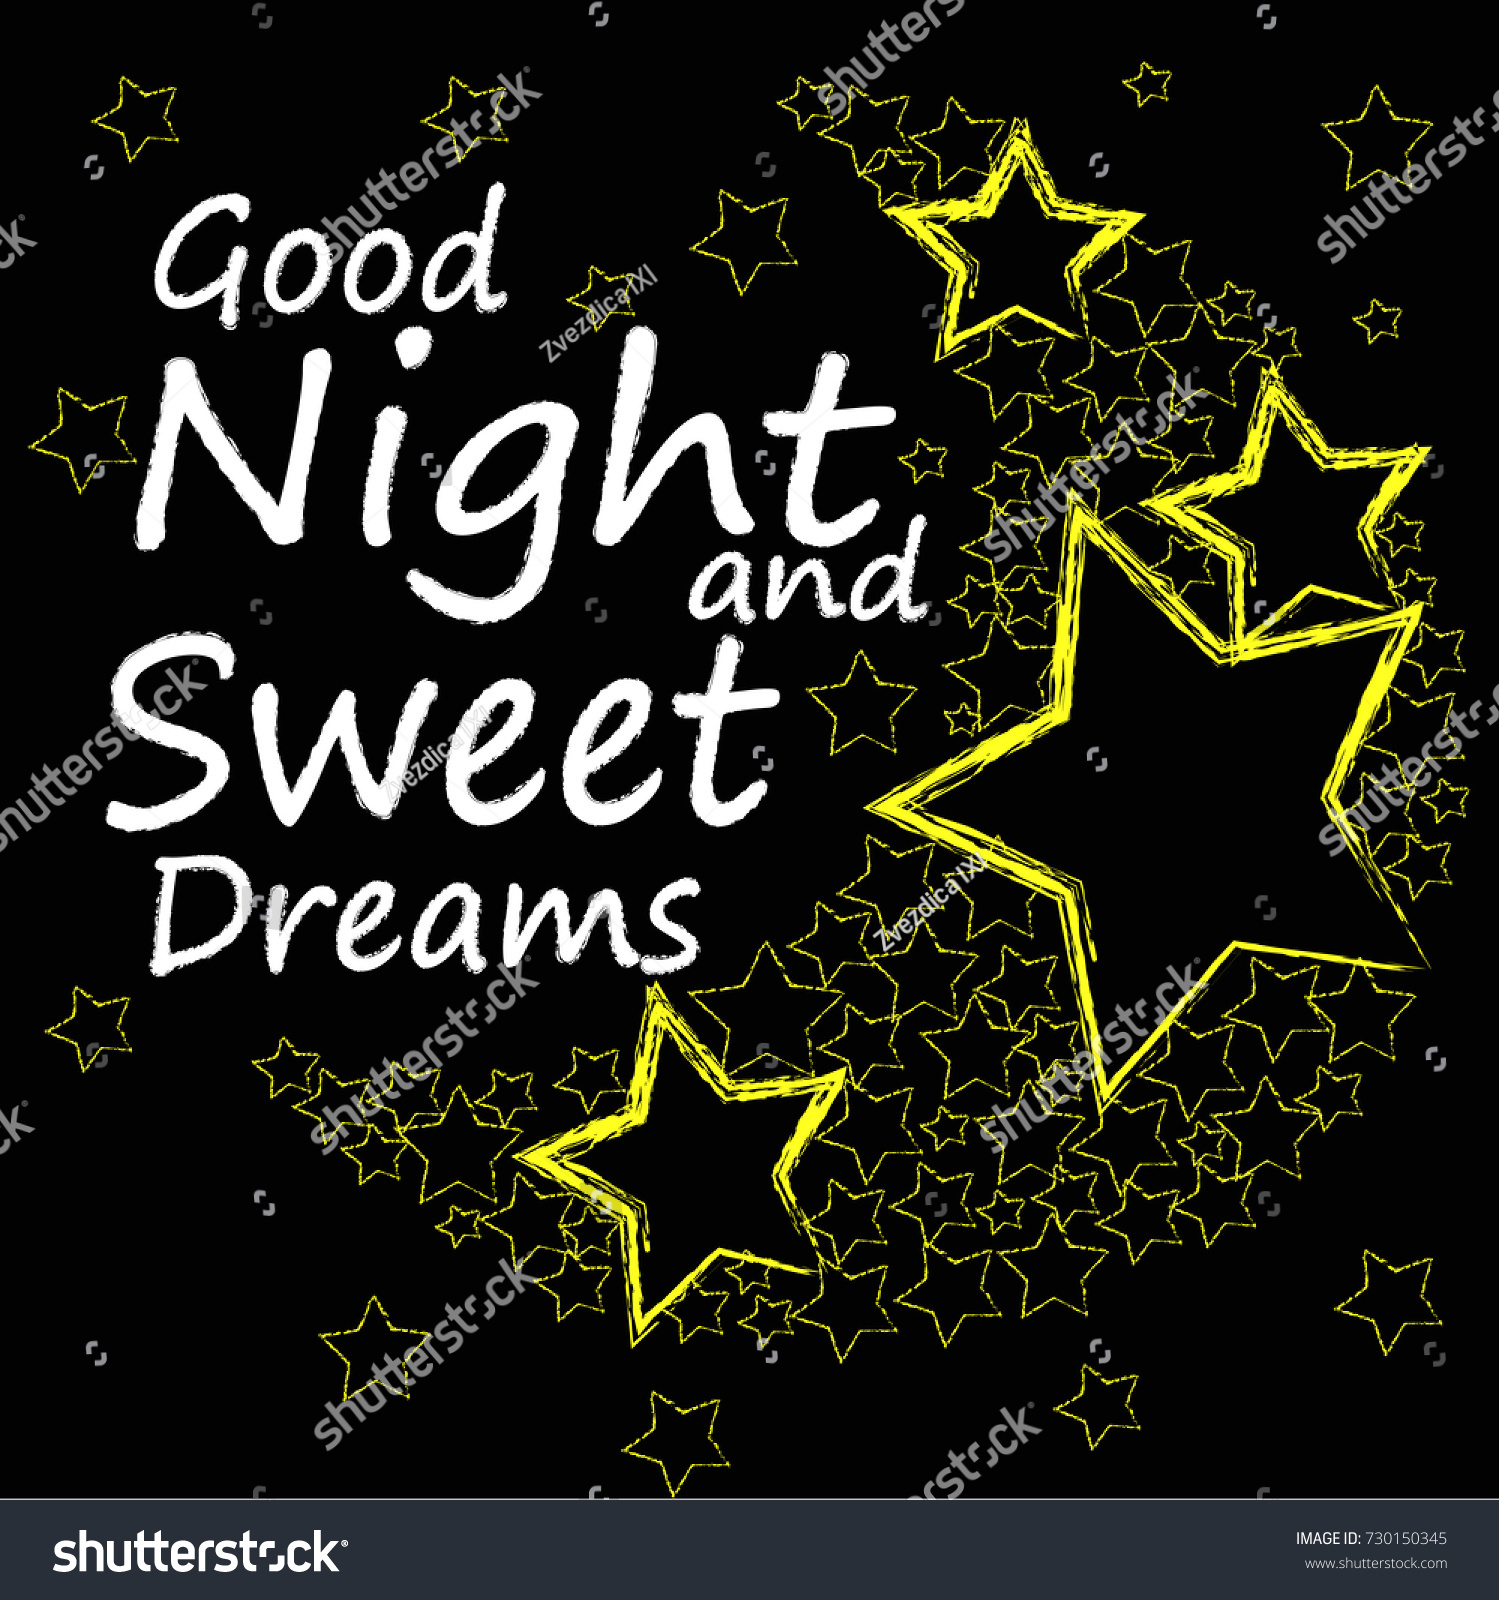 Night sweet good dreams pictures 